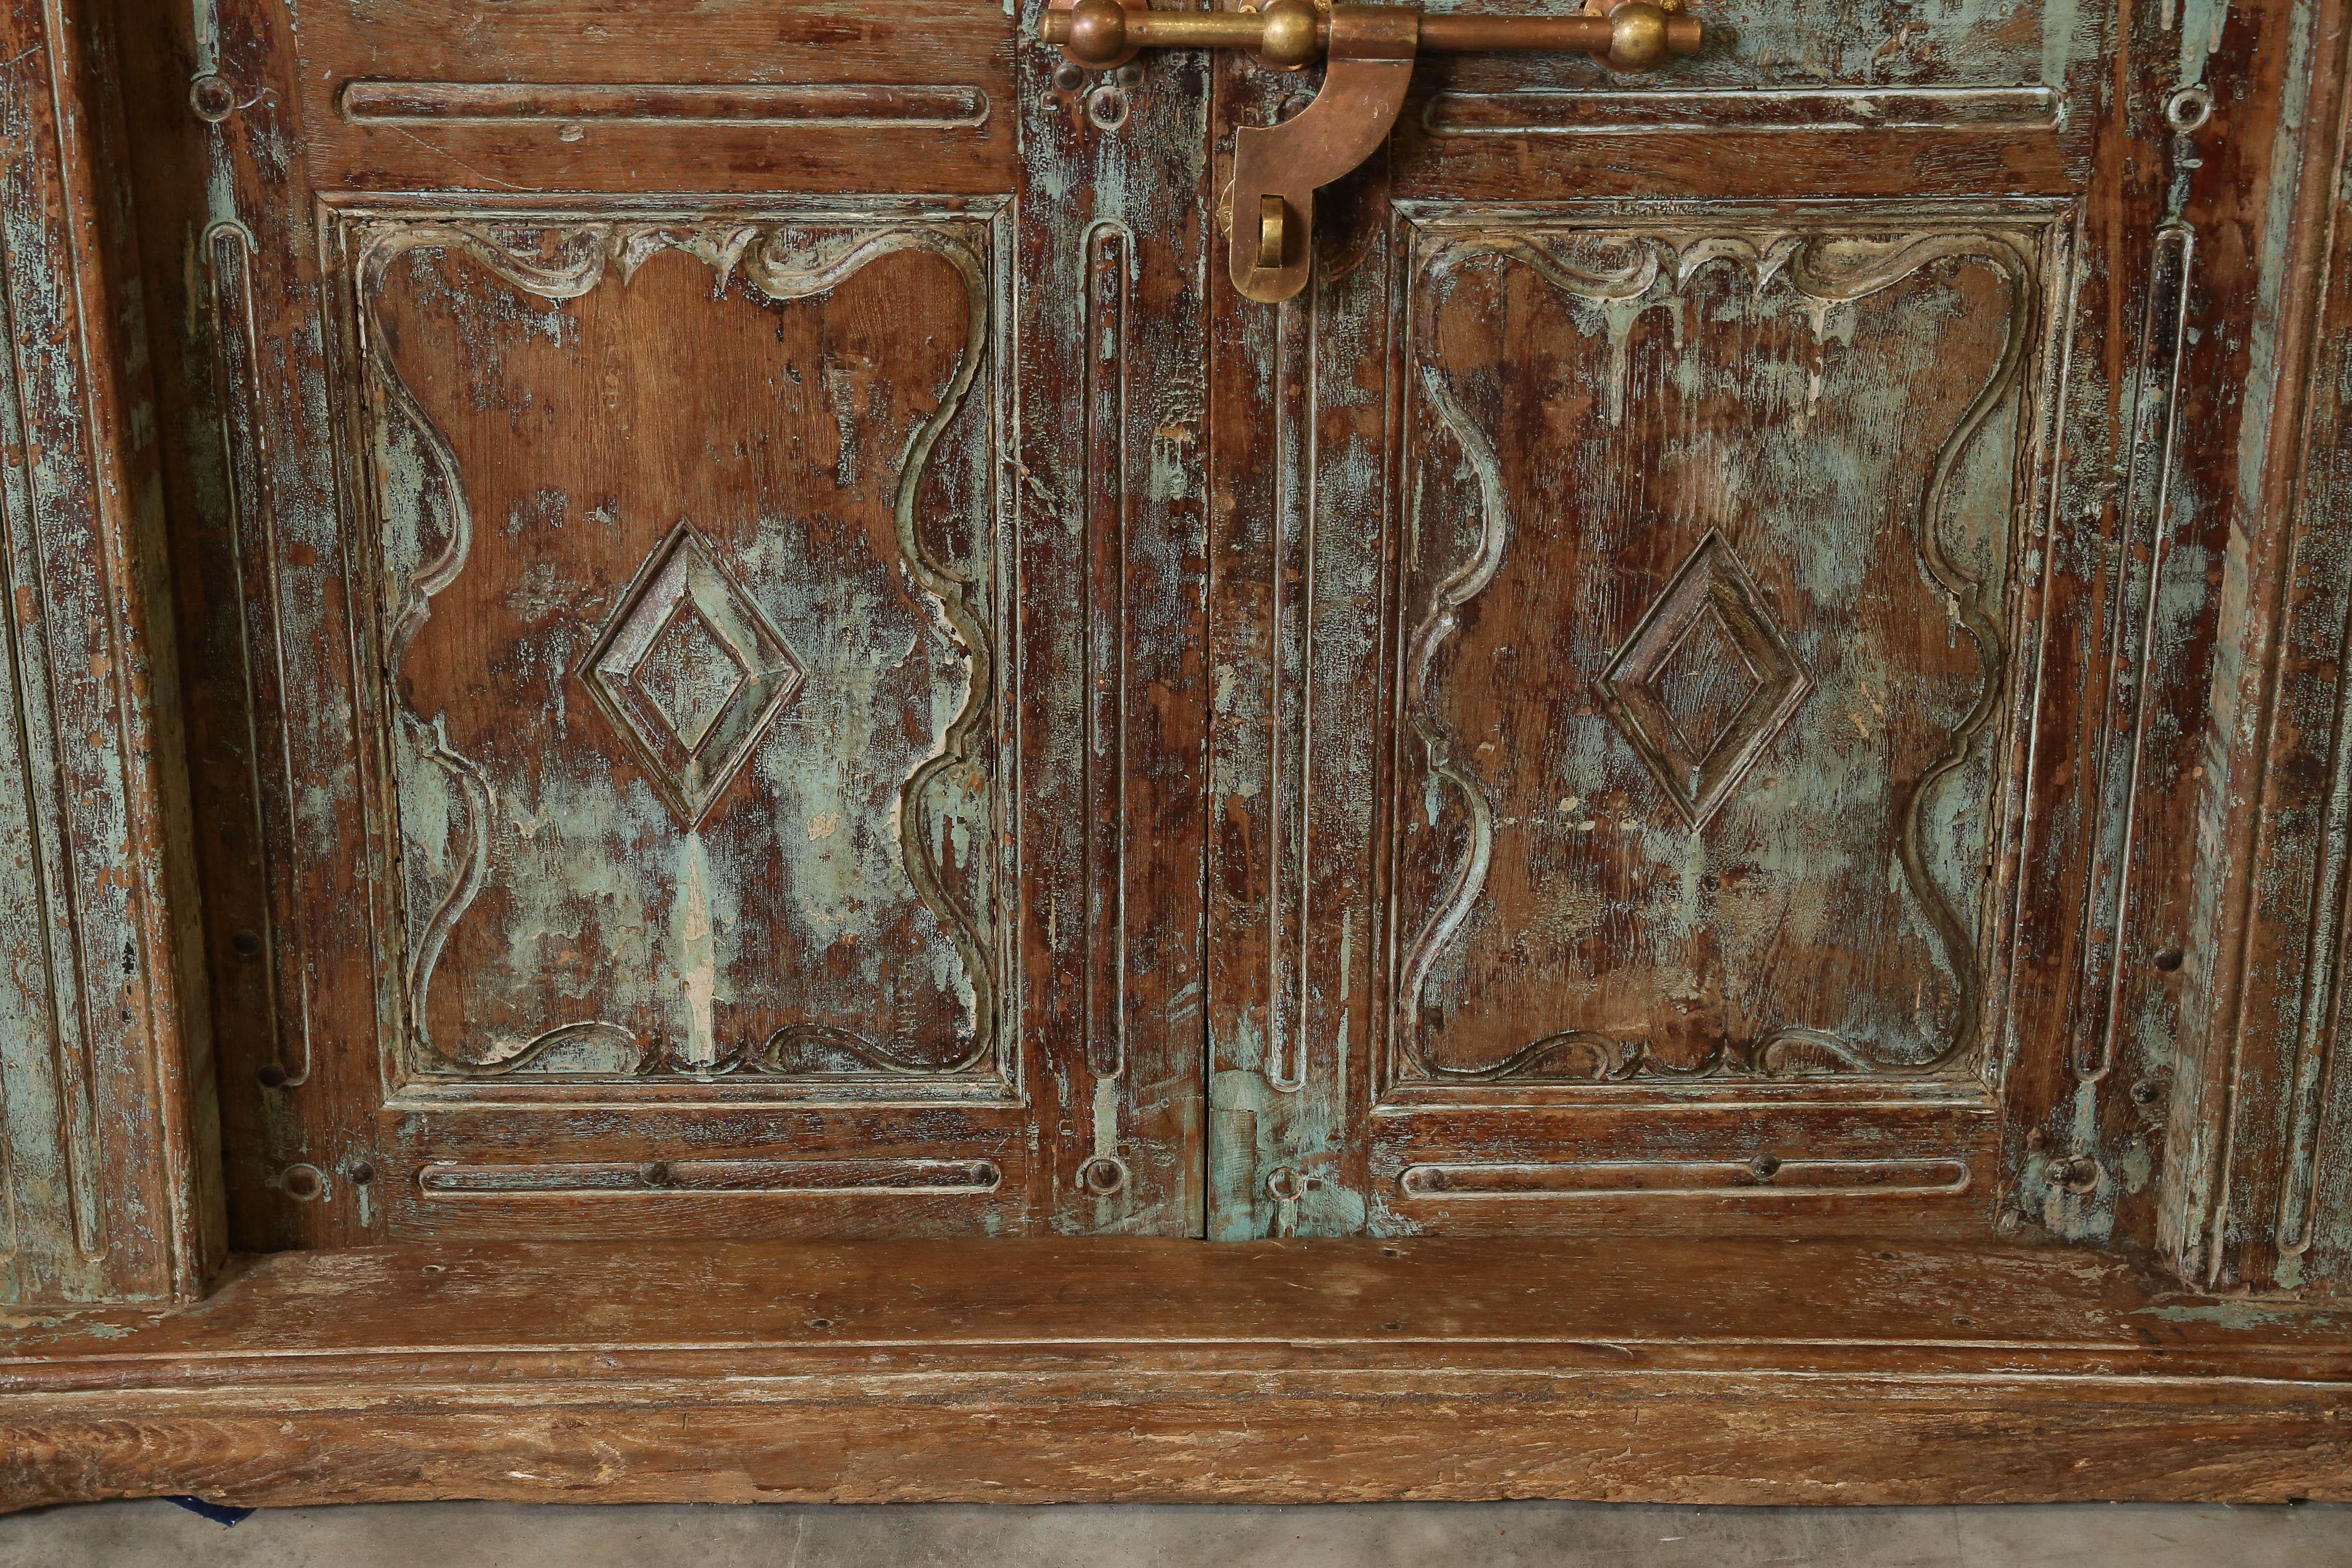 19th Century 1850s Solid Teak Wood Elegant Entry Door from a Settlers Home in a Coastal Town For Sale